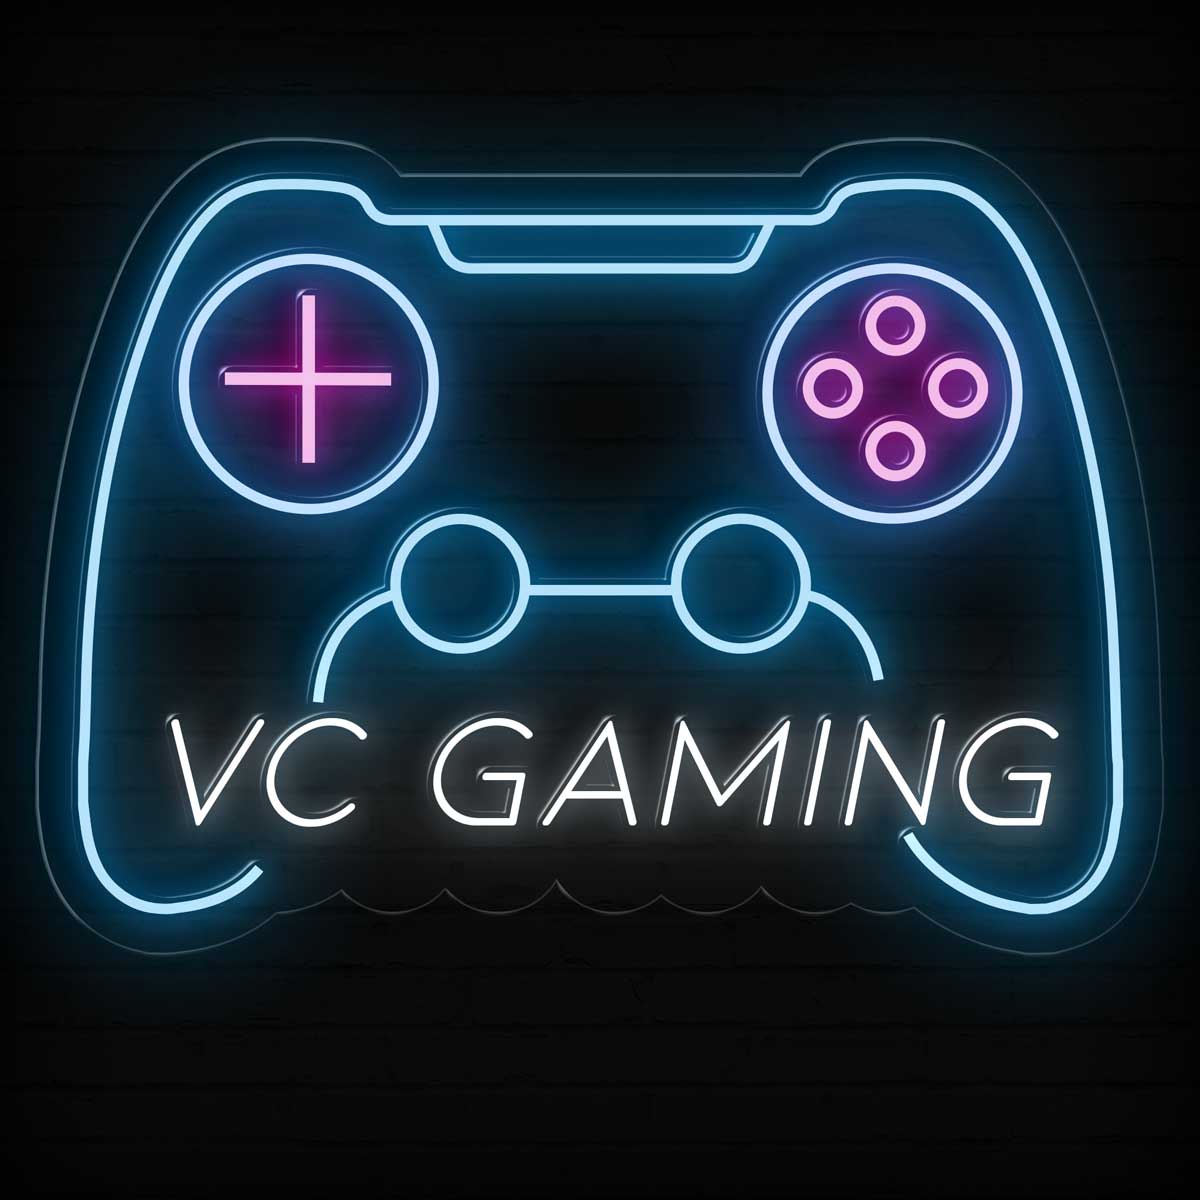 Level Up Your Game Room with a Customized Gaming Neon Sign - NeonXpert